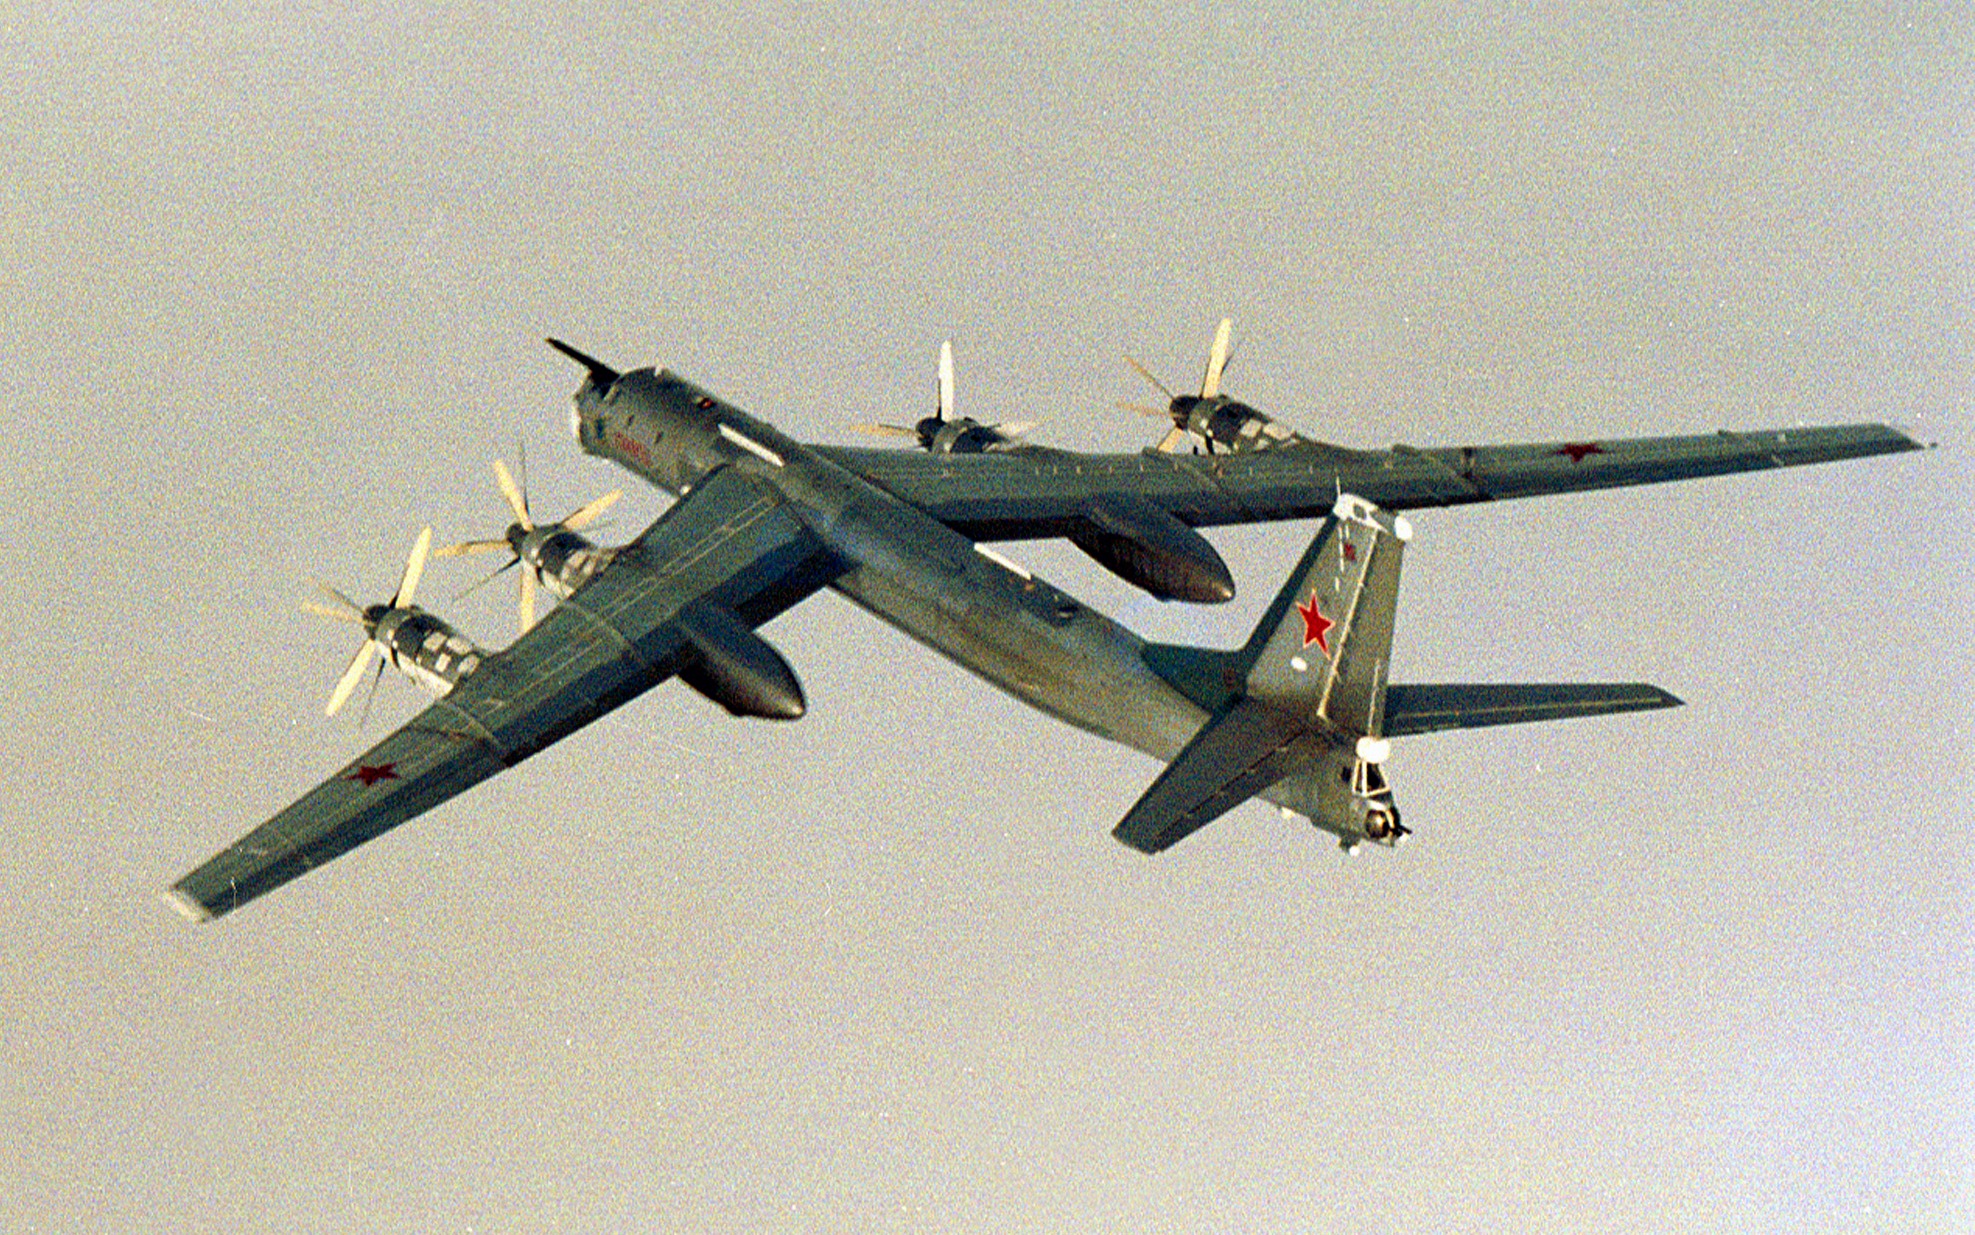 Russia's Bear: The old-fashioned plane still thriving